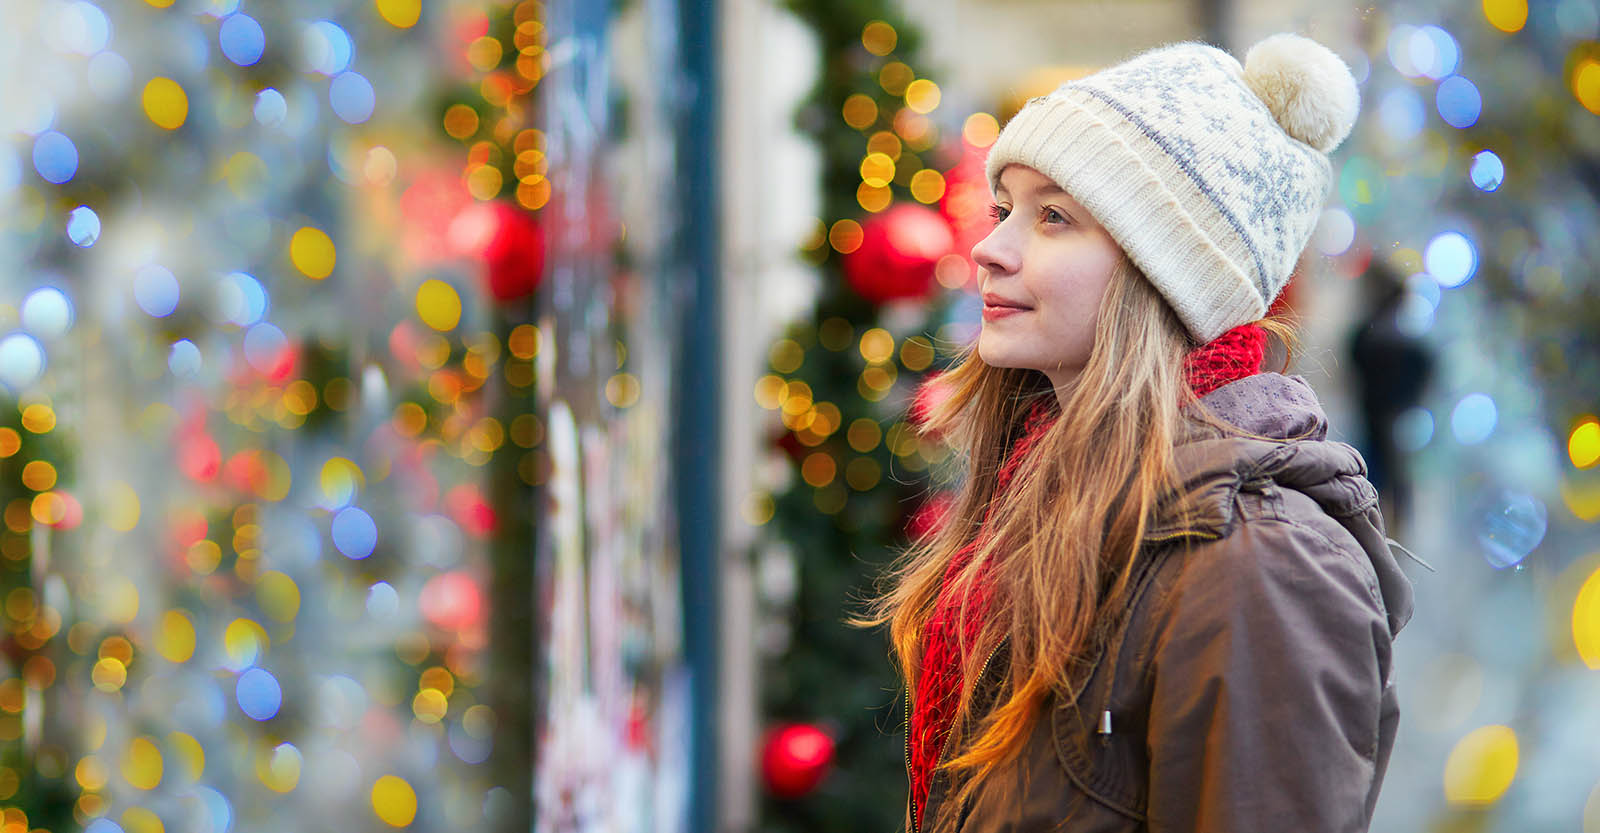 A woman in her winter coat and hat looking into a window with Christmas ornaments.